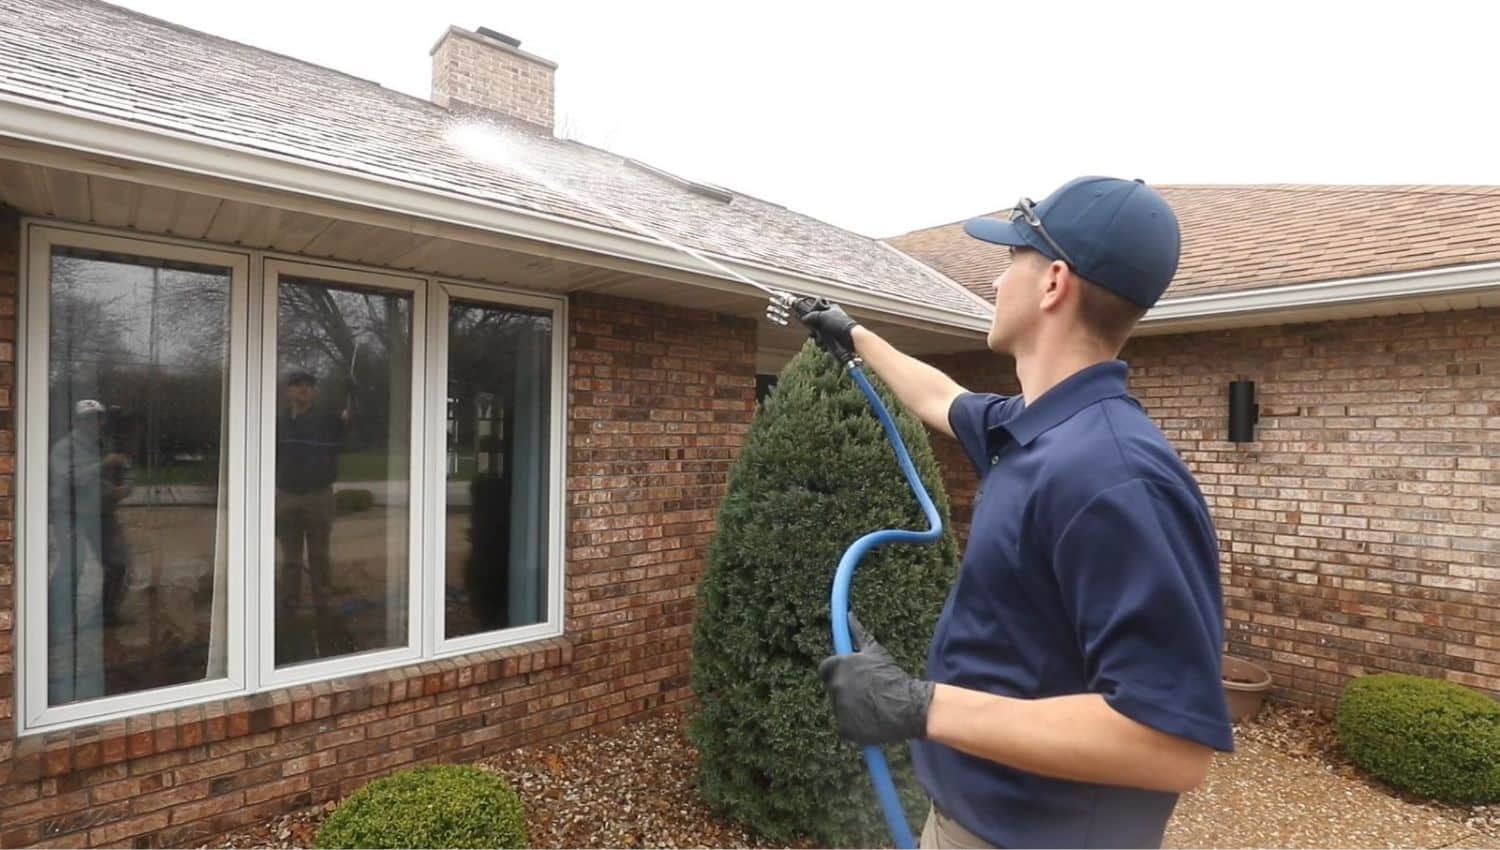 Soft Washing Your Roof Is Smart and Safe